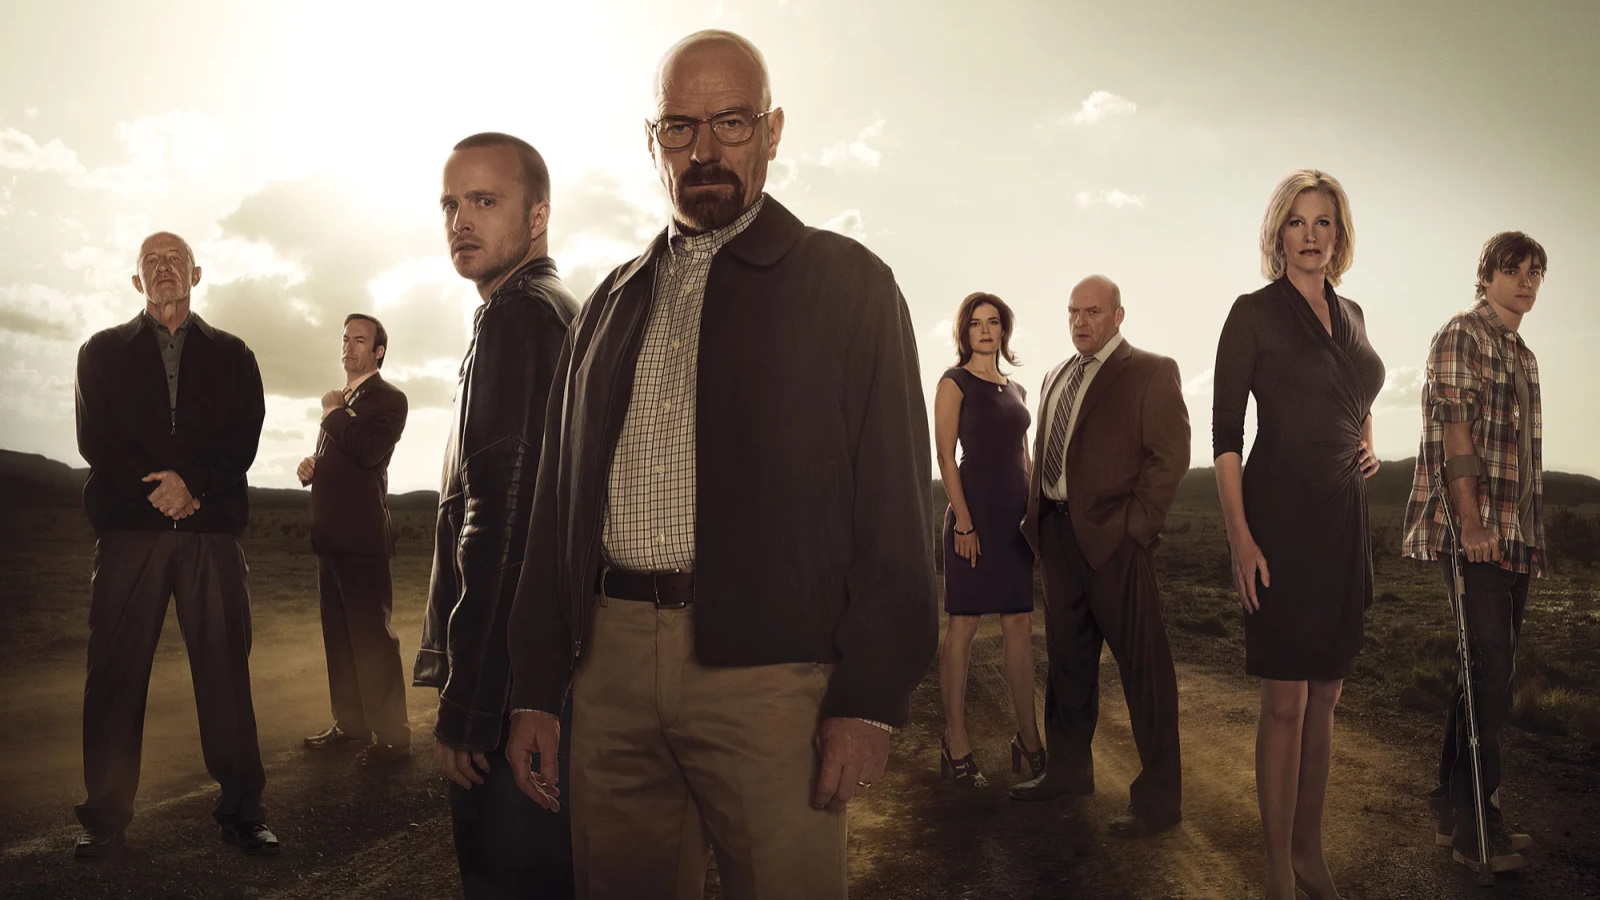 Breaking Bad Villain Spinoff In The Works?